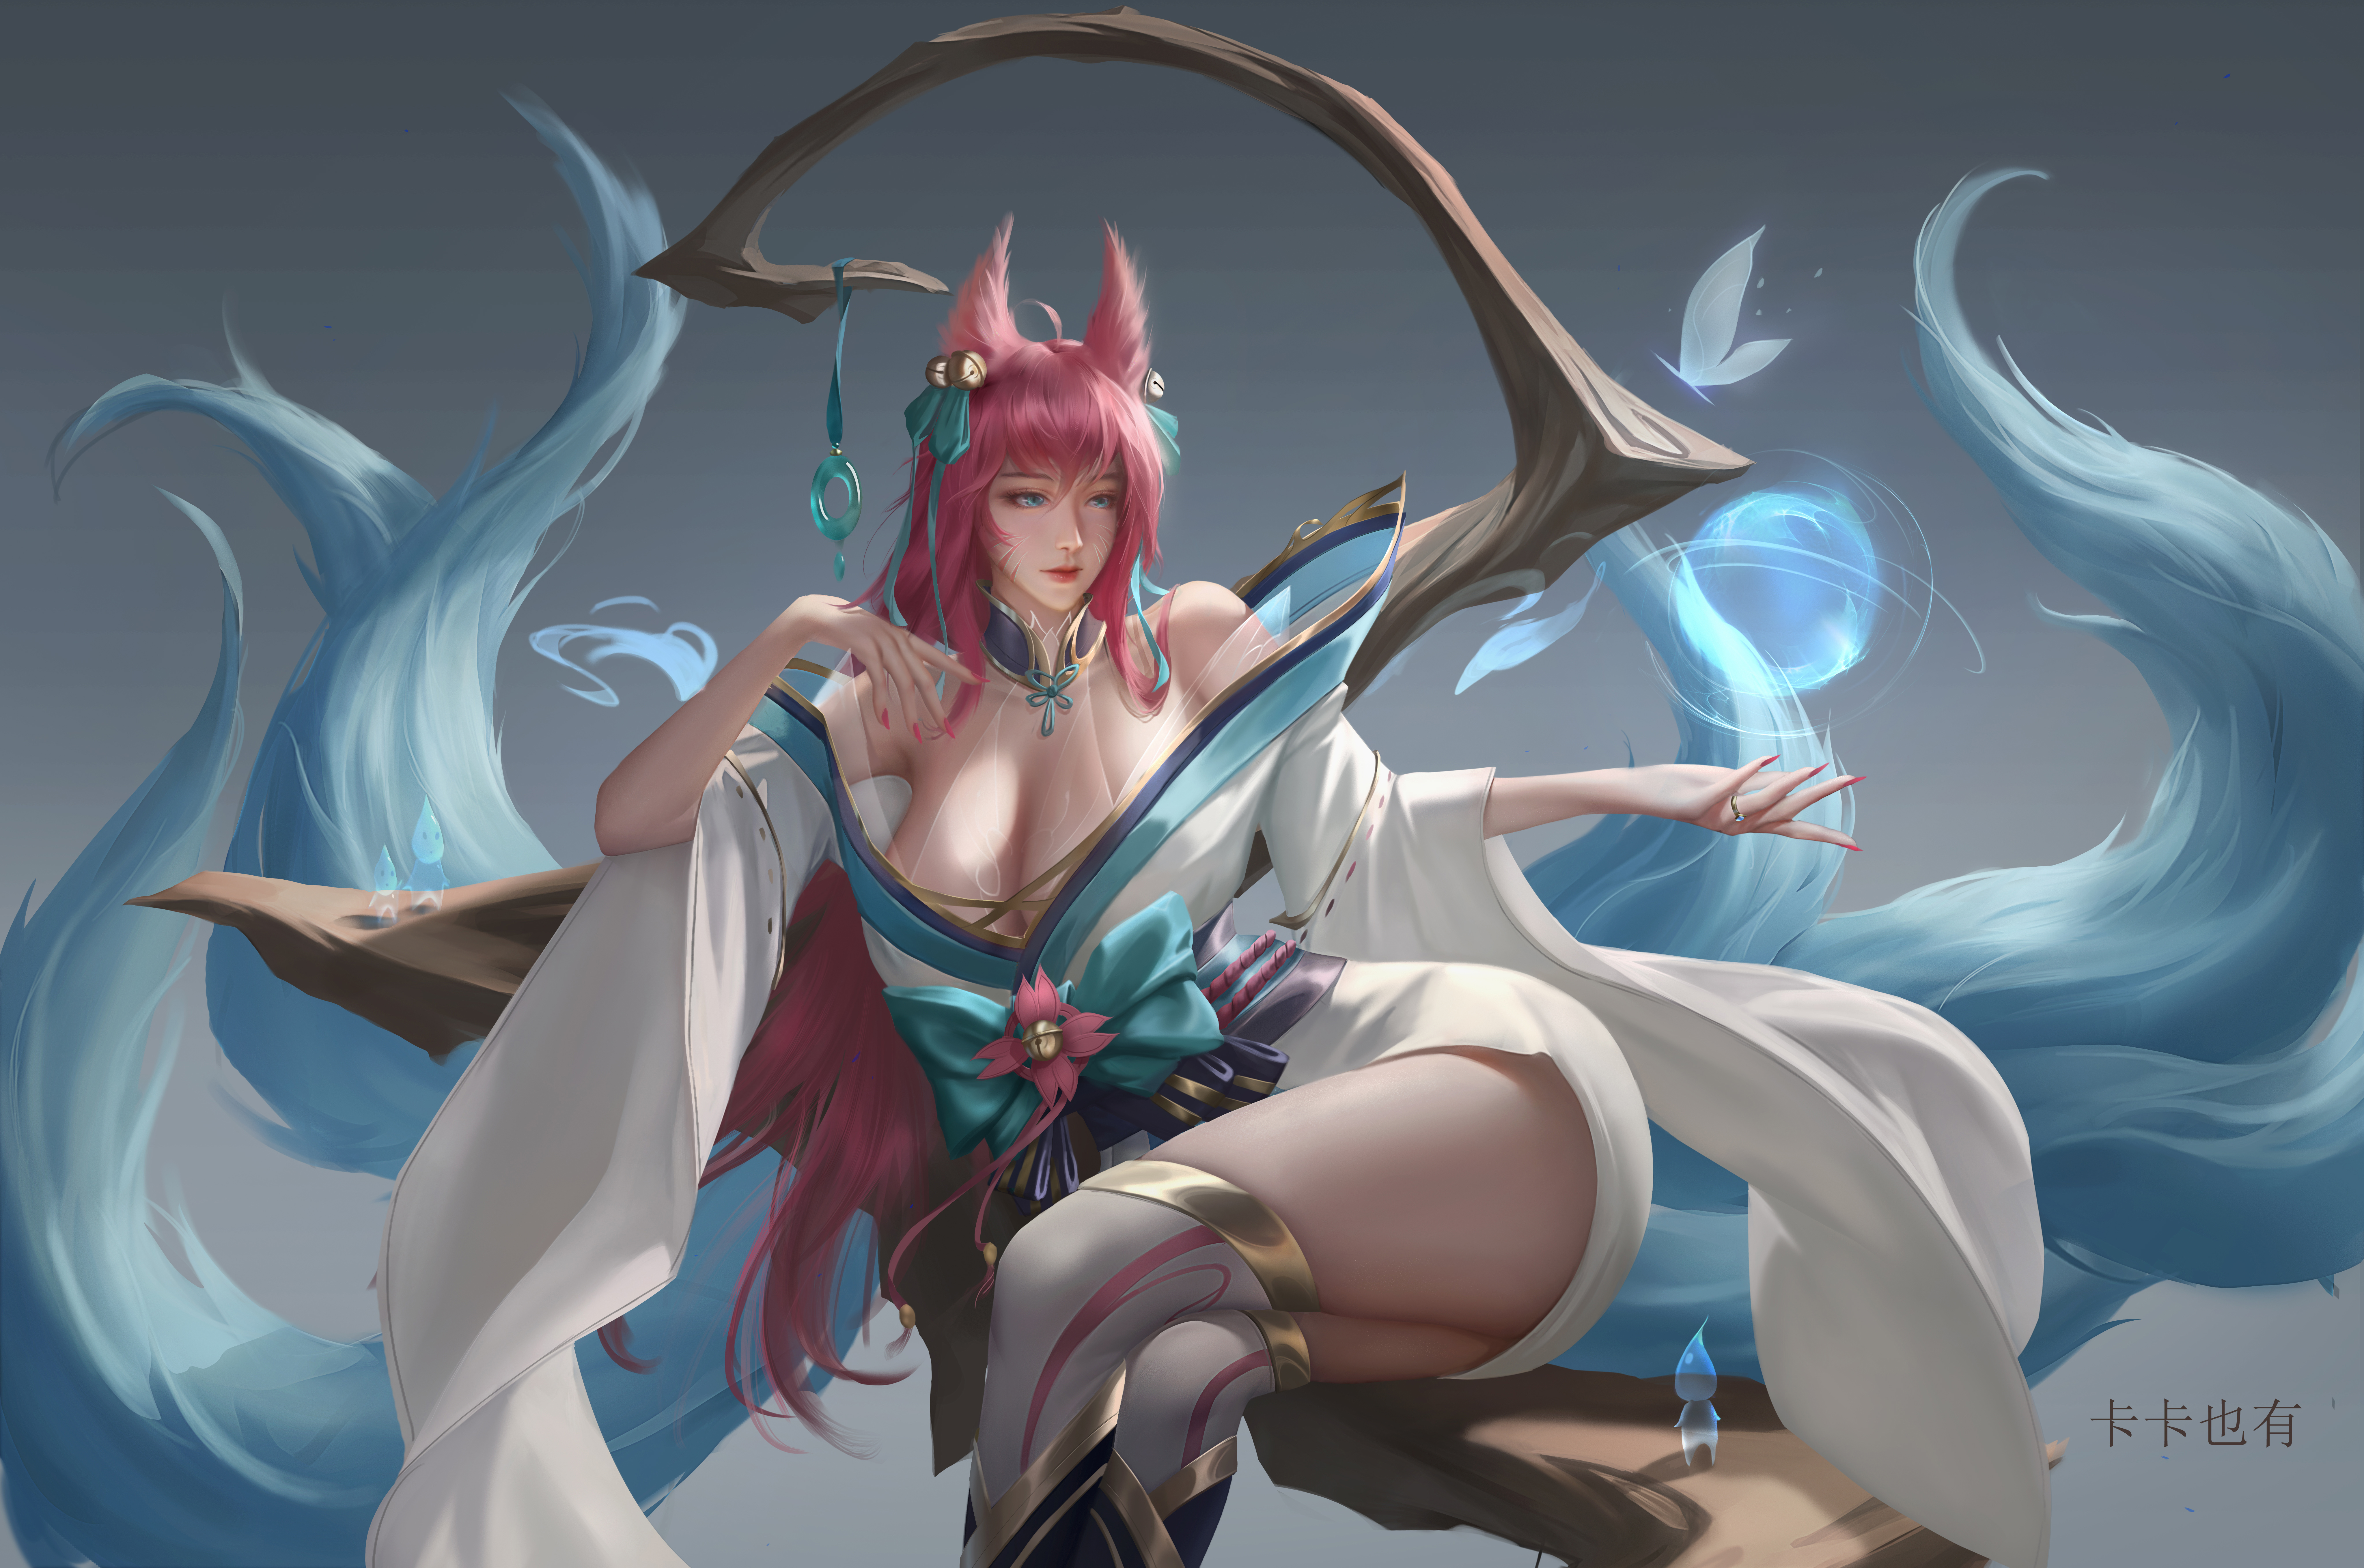 General 8189x5433 League of Legends video games video game girls video game characters fantasy girl fictional character fox girl nine tails pink hair bangs blue eyes cleavage kimono sitting thick thigh curvy fantasy art artwork 2D illustration drawing fan art